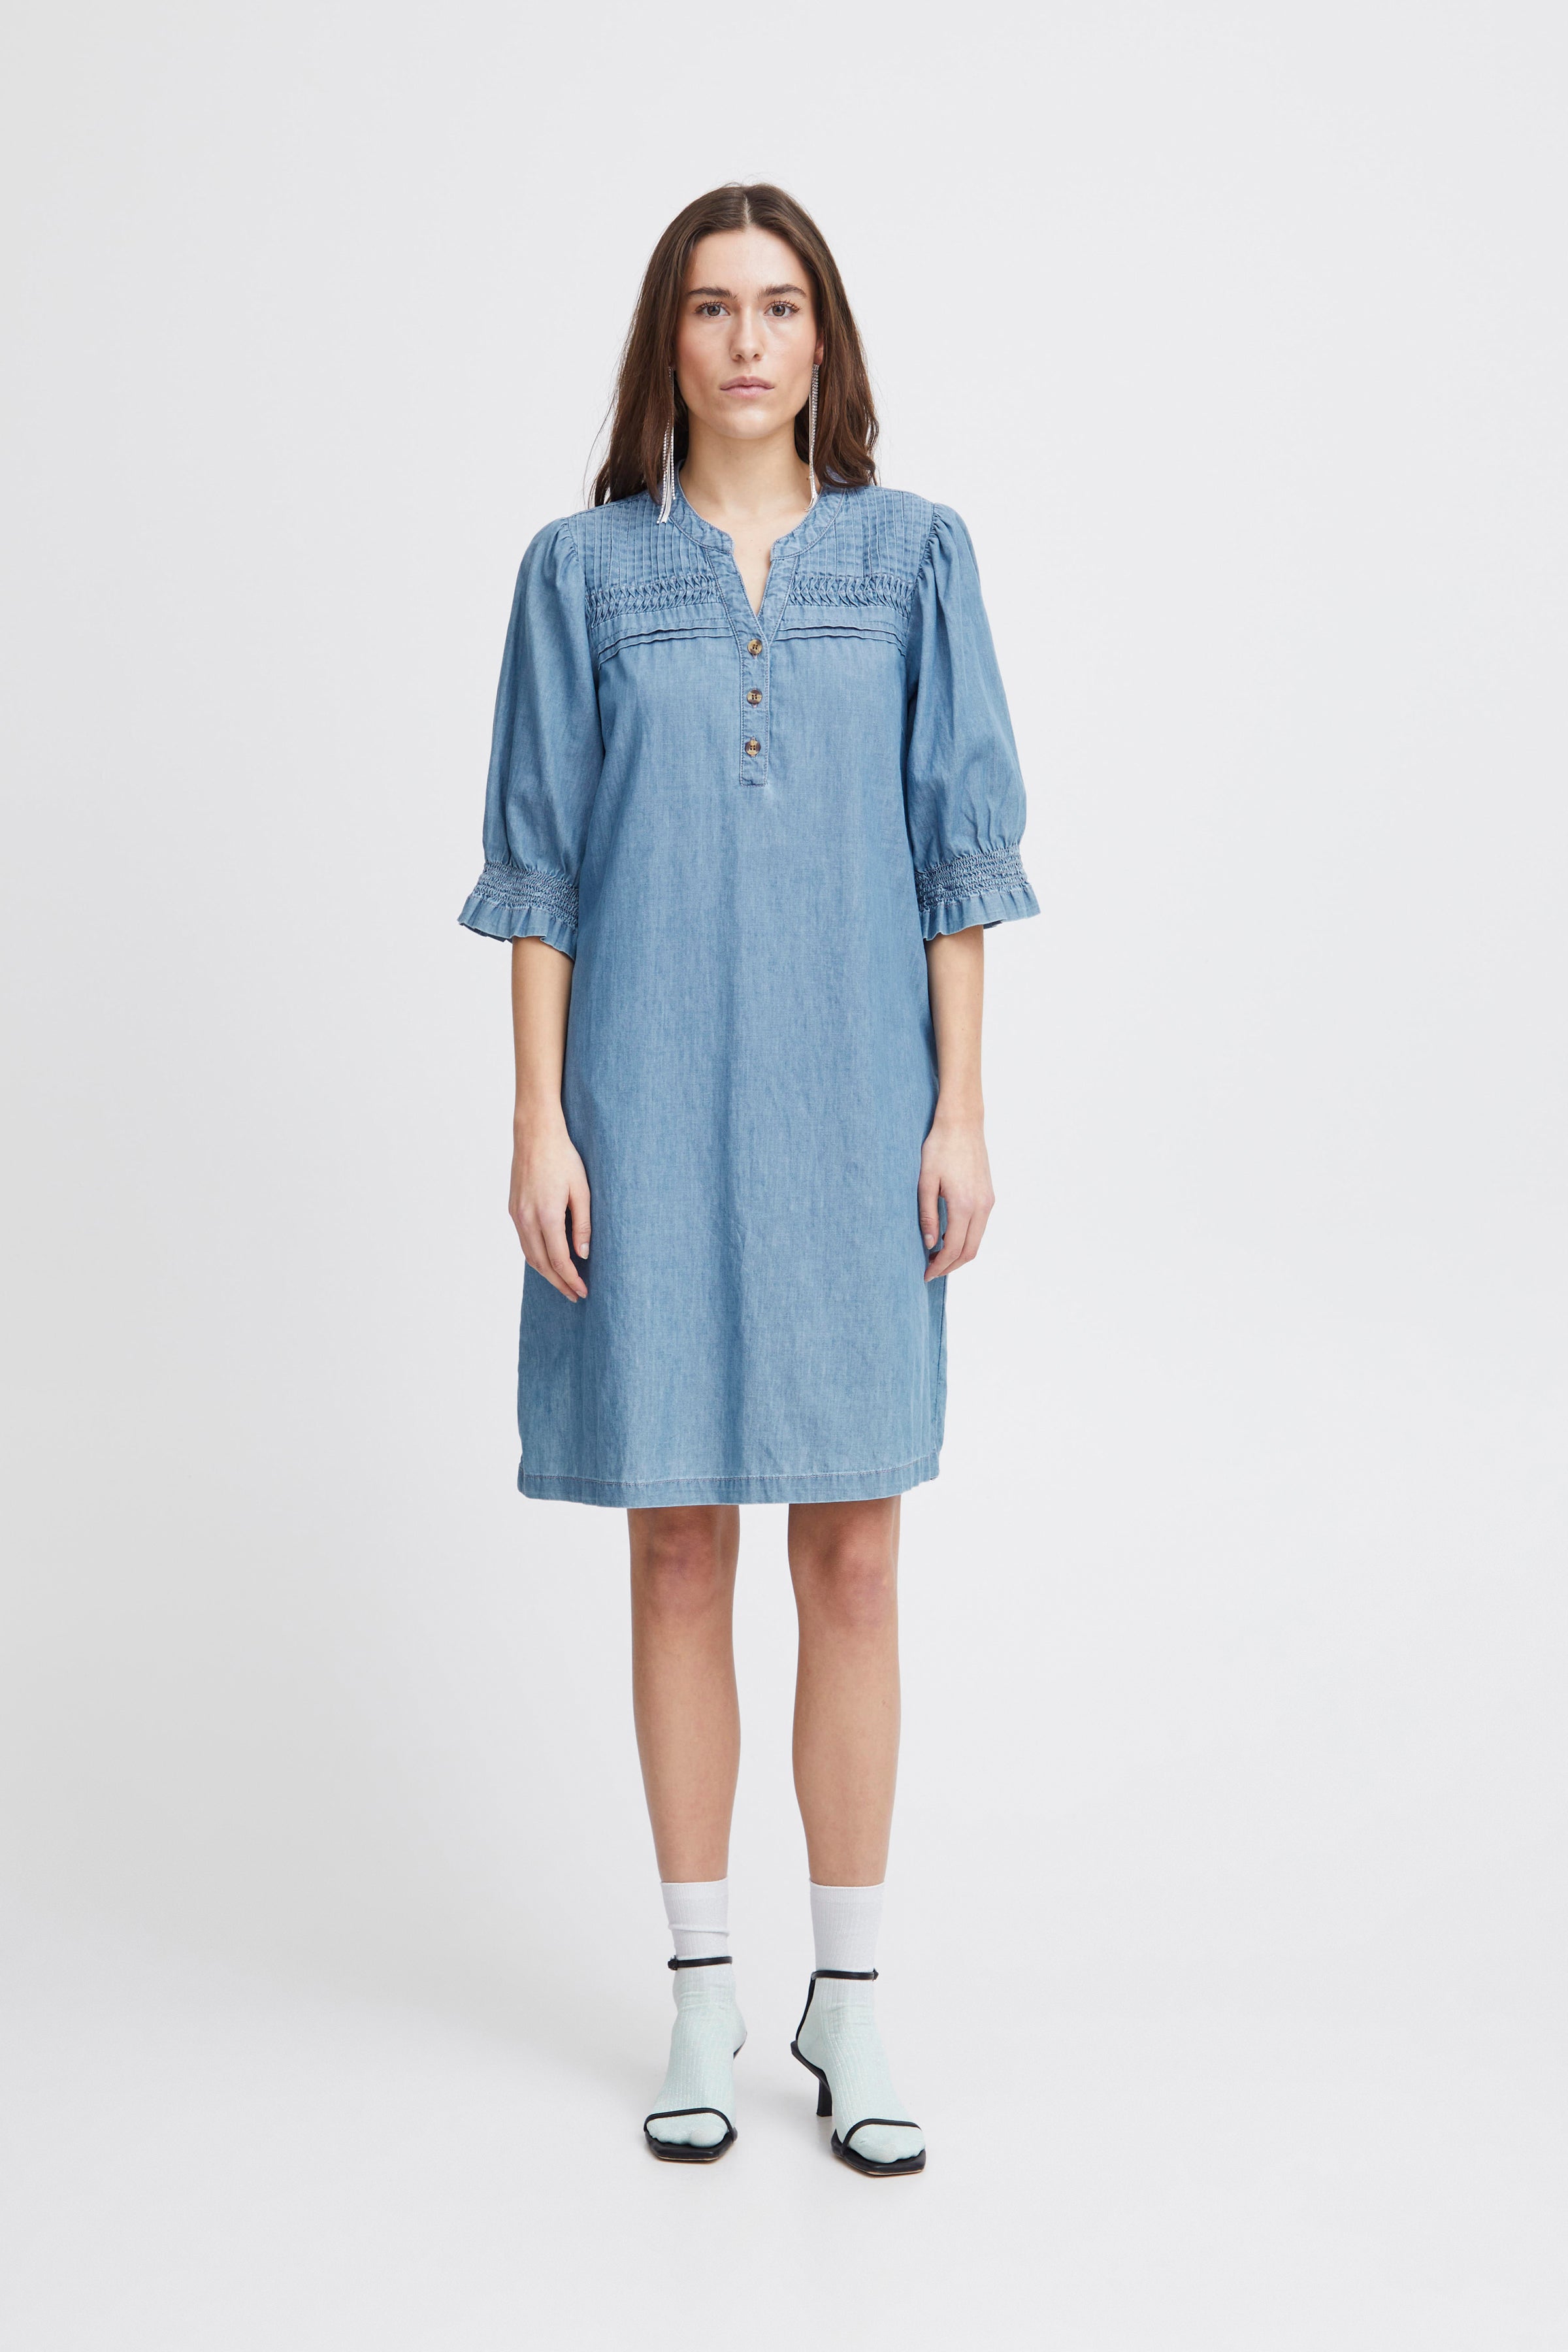 Ancey Dress in Washed Blue